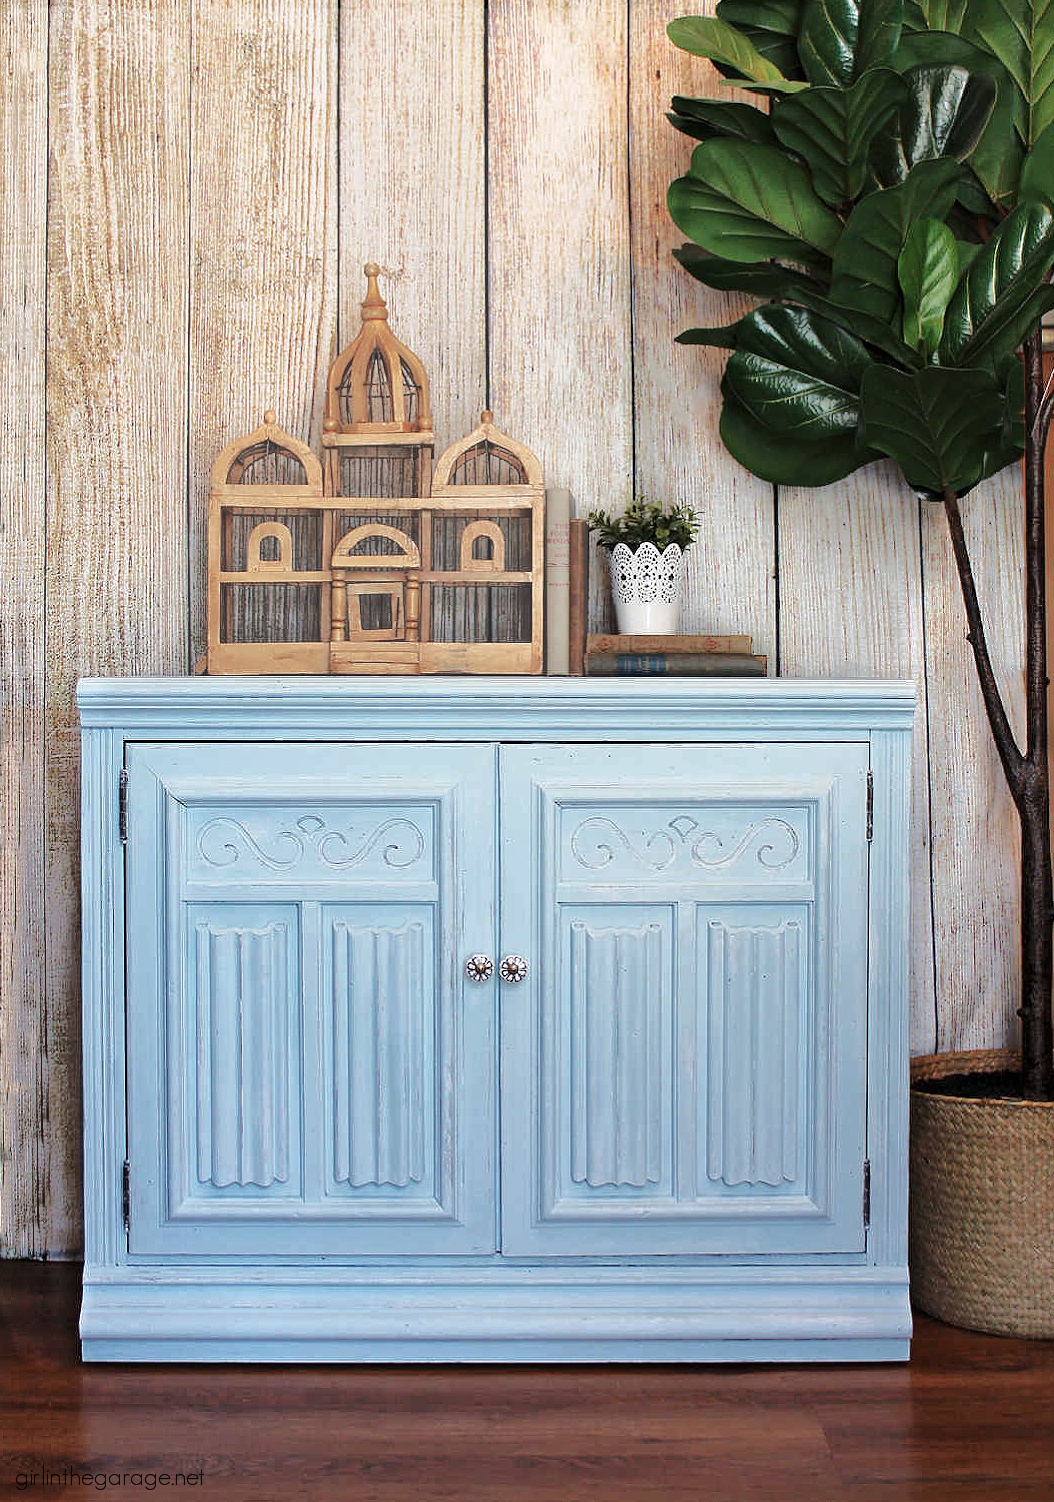 How to paint a vintage wood cabinet with Rustoleum Chalked Paint in Soothing Blue. Step by step painted furniture tutorial by Girl in the Garage.